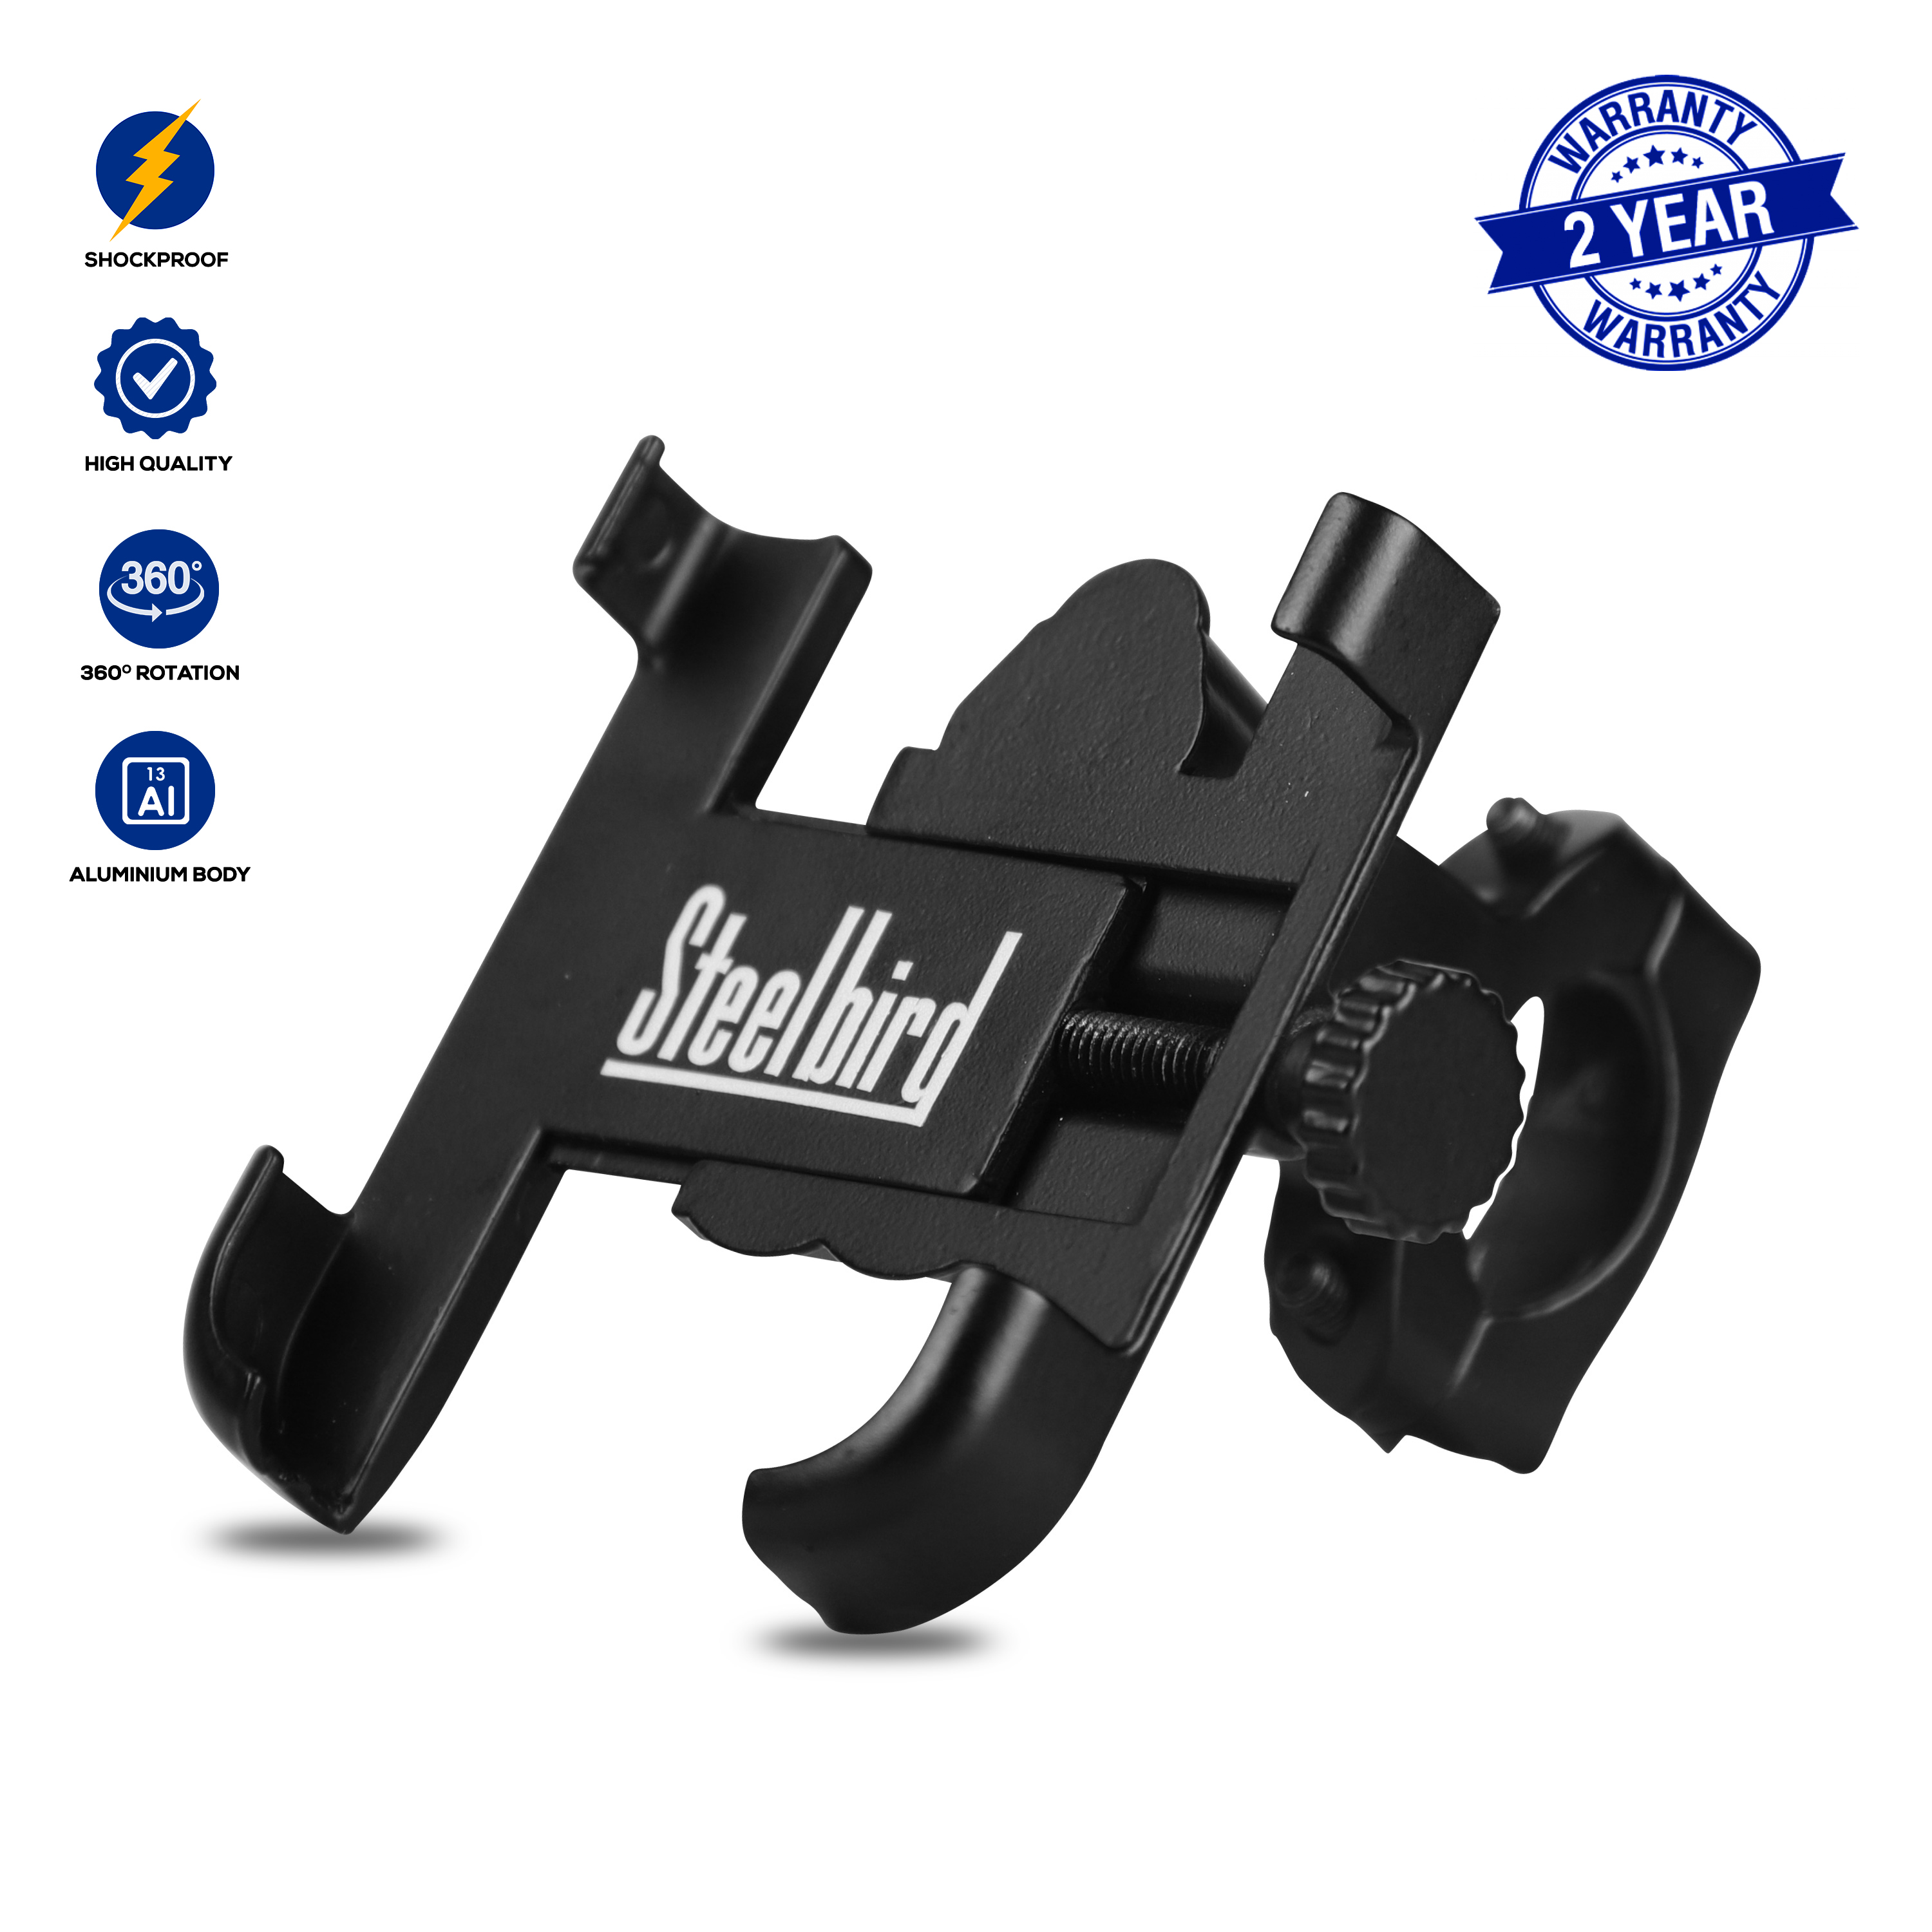 Steelbird Universal Bike Mount Phone Holder 360 Degree Rotating Handlebar Cradle Stand for Bicycle, Motorcycle, Fits All Smartphones (Mobile Holder) 